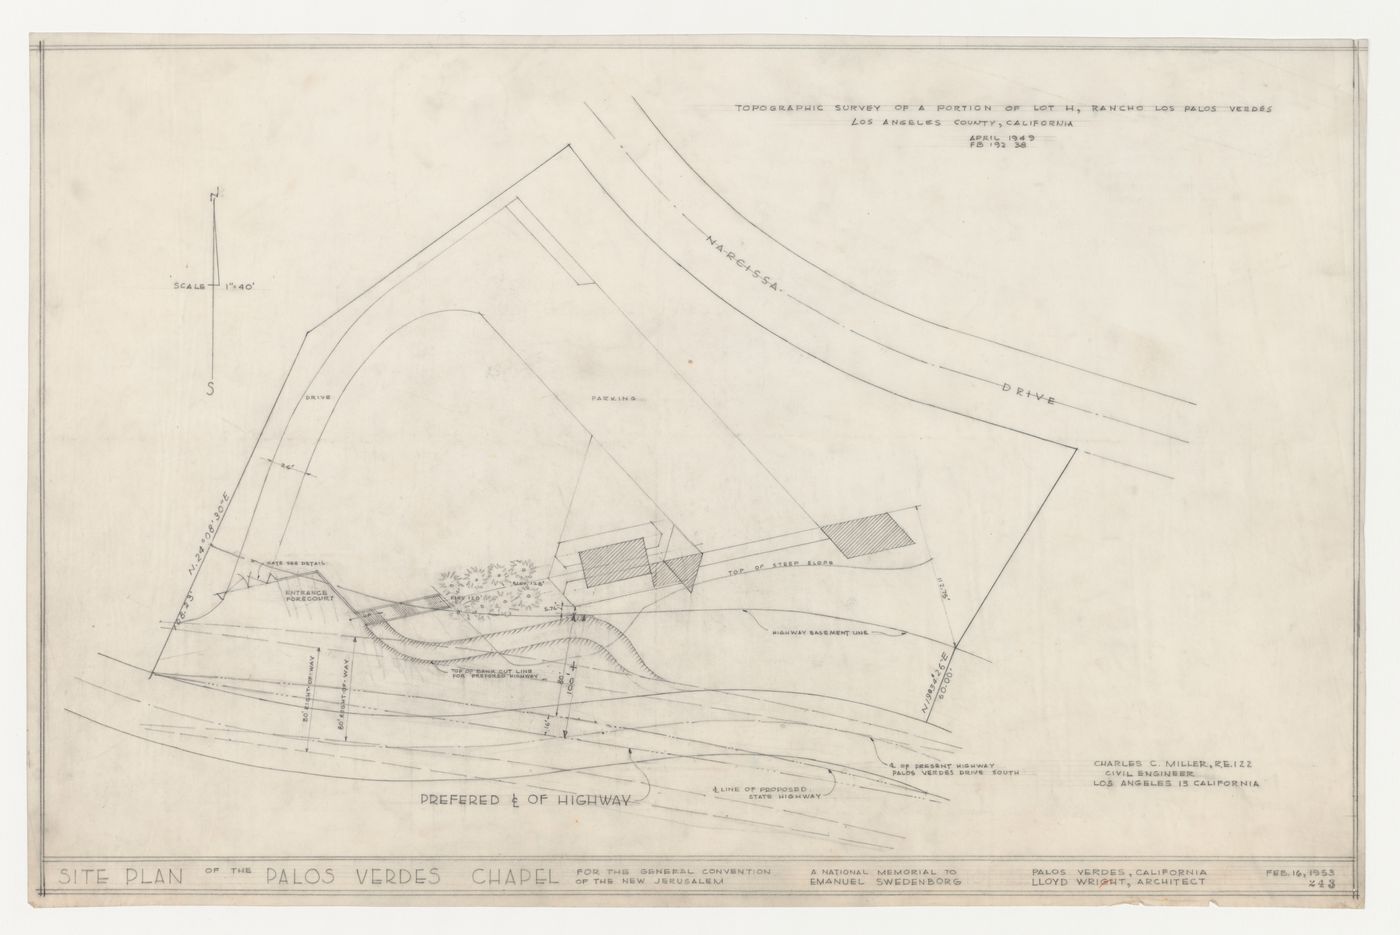 Wayfarers' Chapel, Palos Verdes, California: Topographic survey showing proposed and preferred locations for the development of Palos Verdes Drive South into a highway